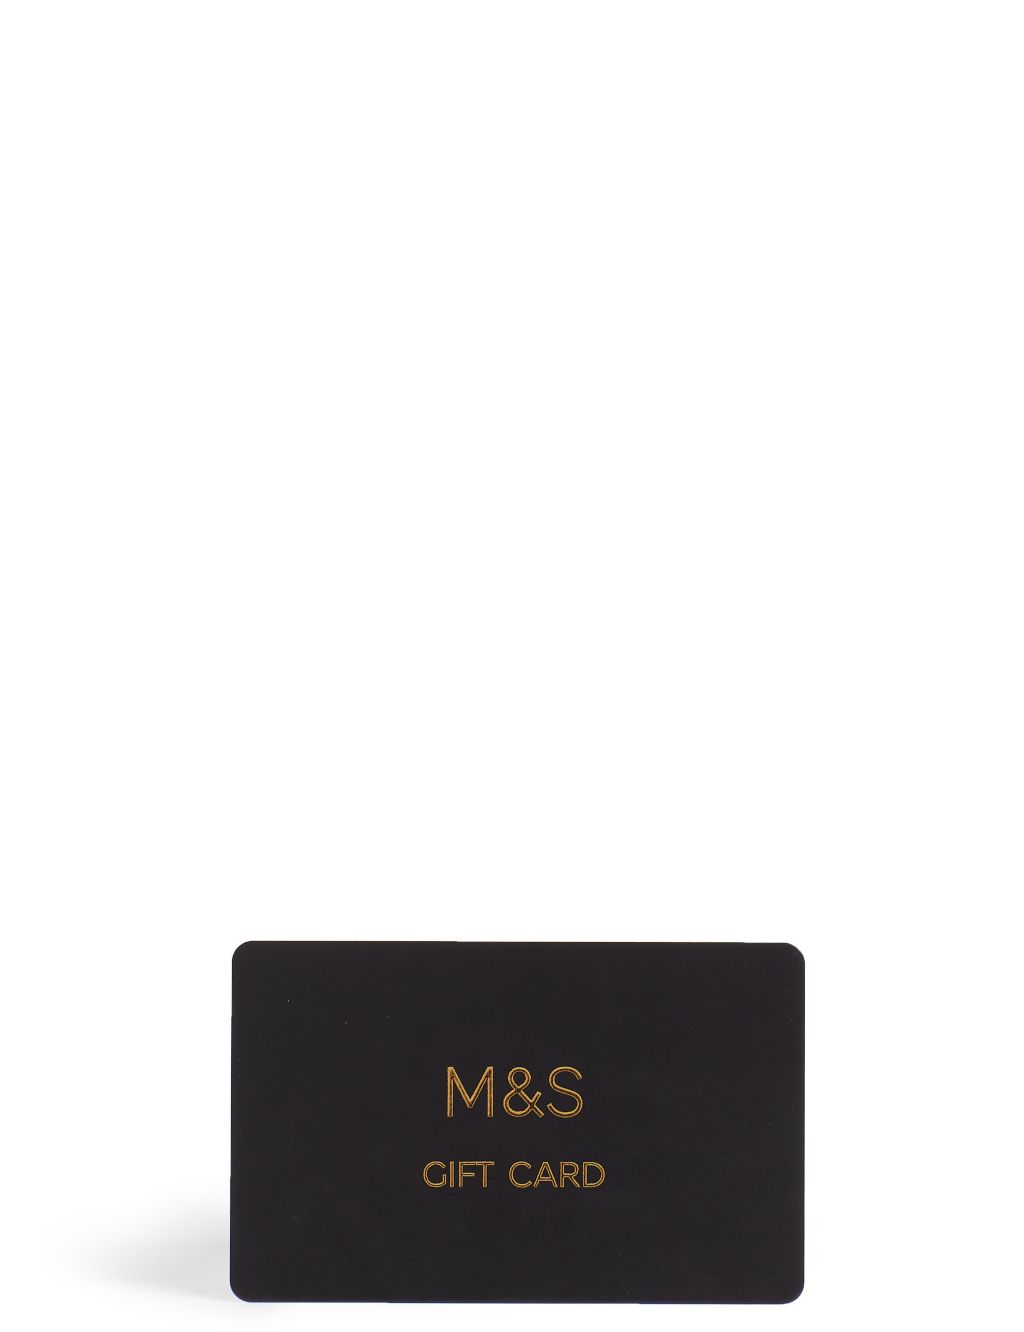 M&S Gift Card 4 of 4